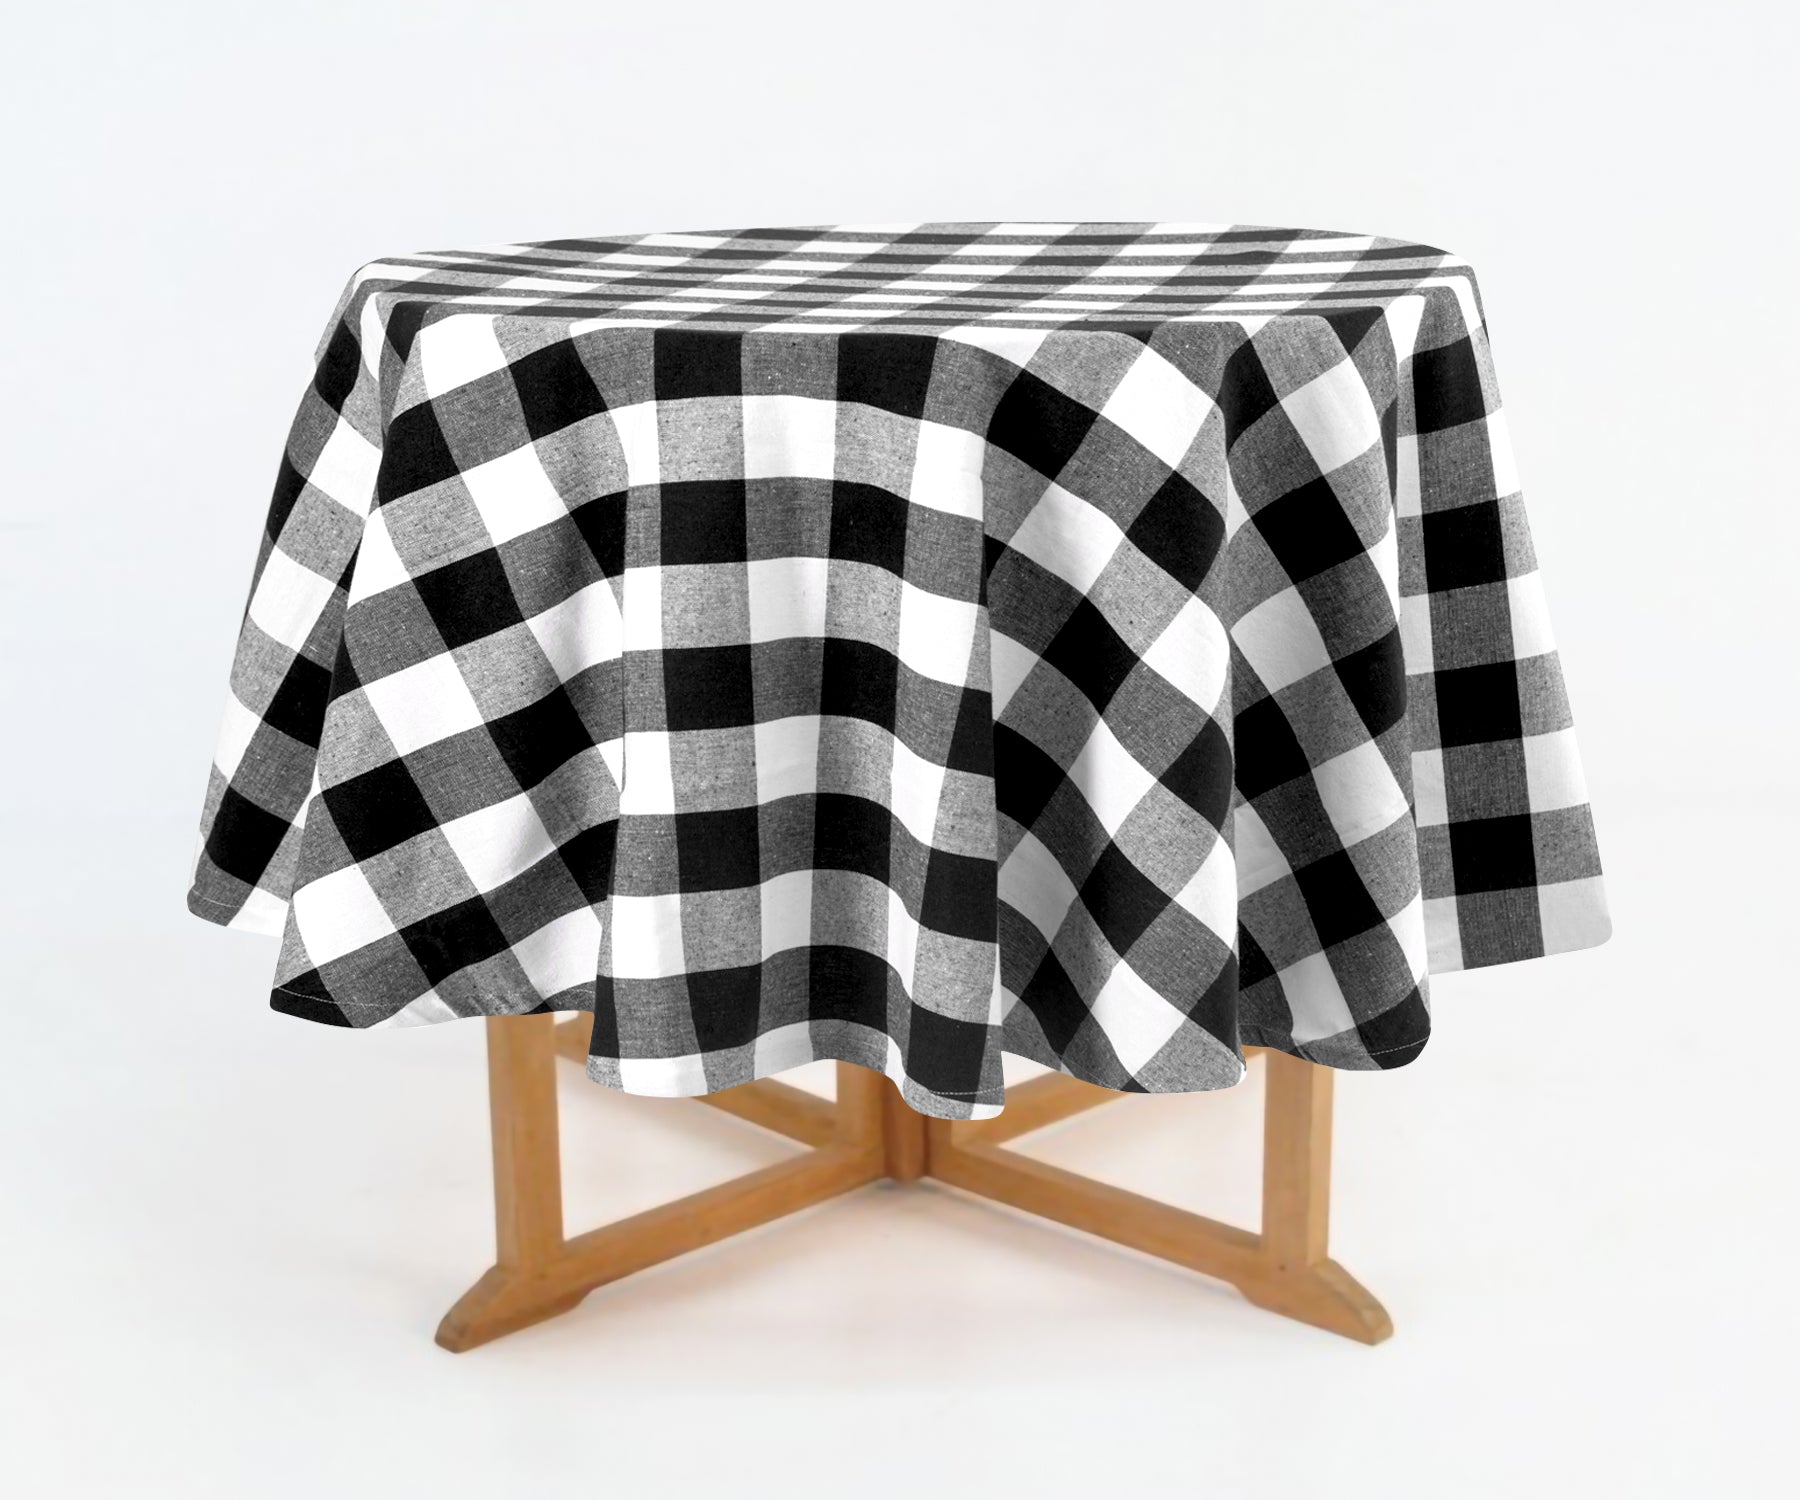 60-inch round tablecloth, tailored for round tables, offers a neat and tailored appearance.